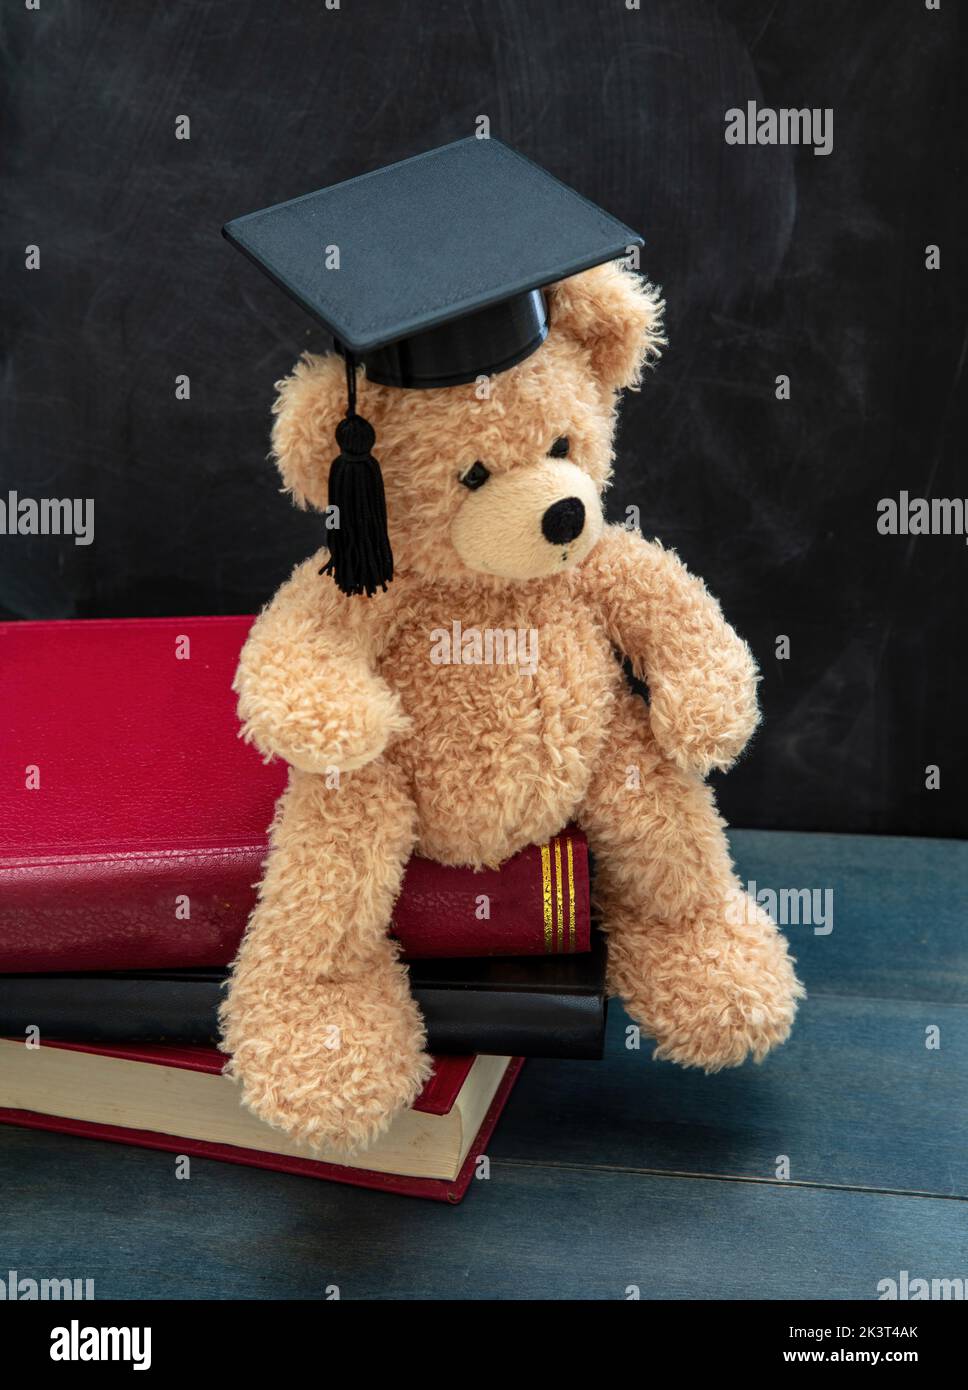 Student education concept. Teddy bear with graduation cap and books on school desk. Blackboard background. Stock Photo